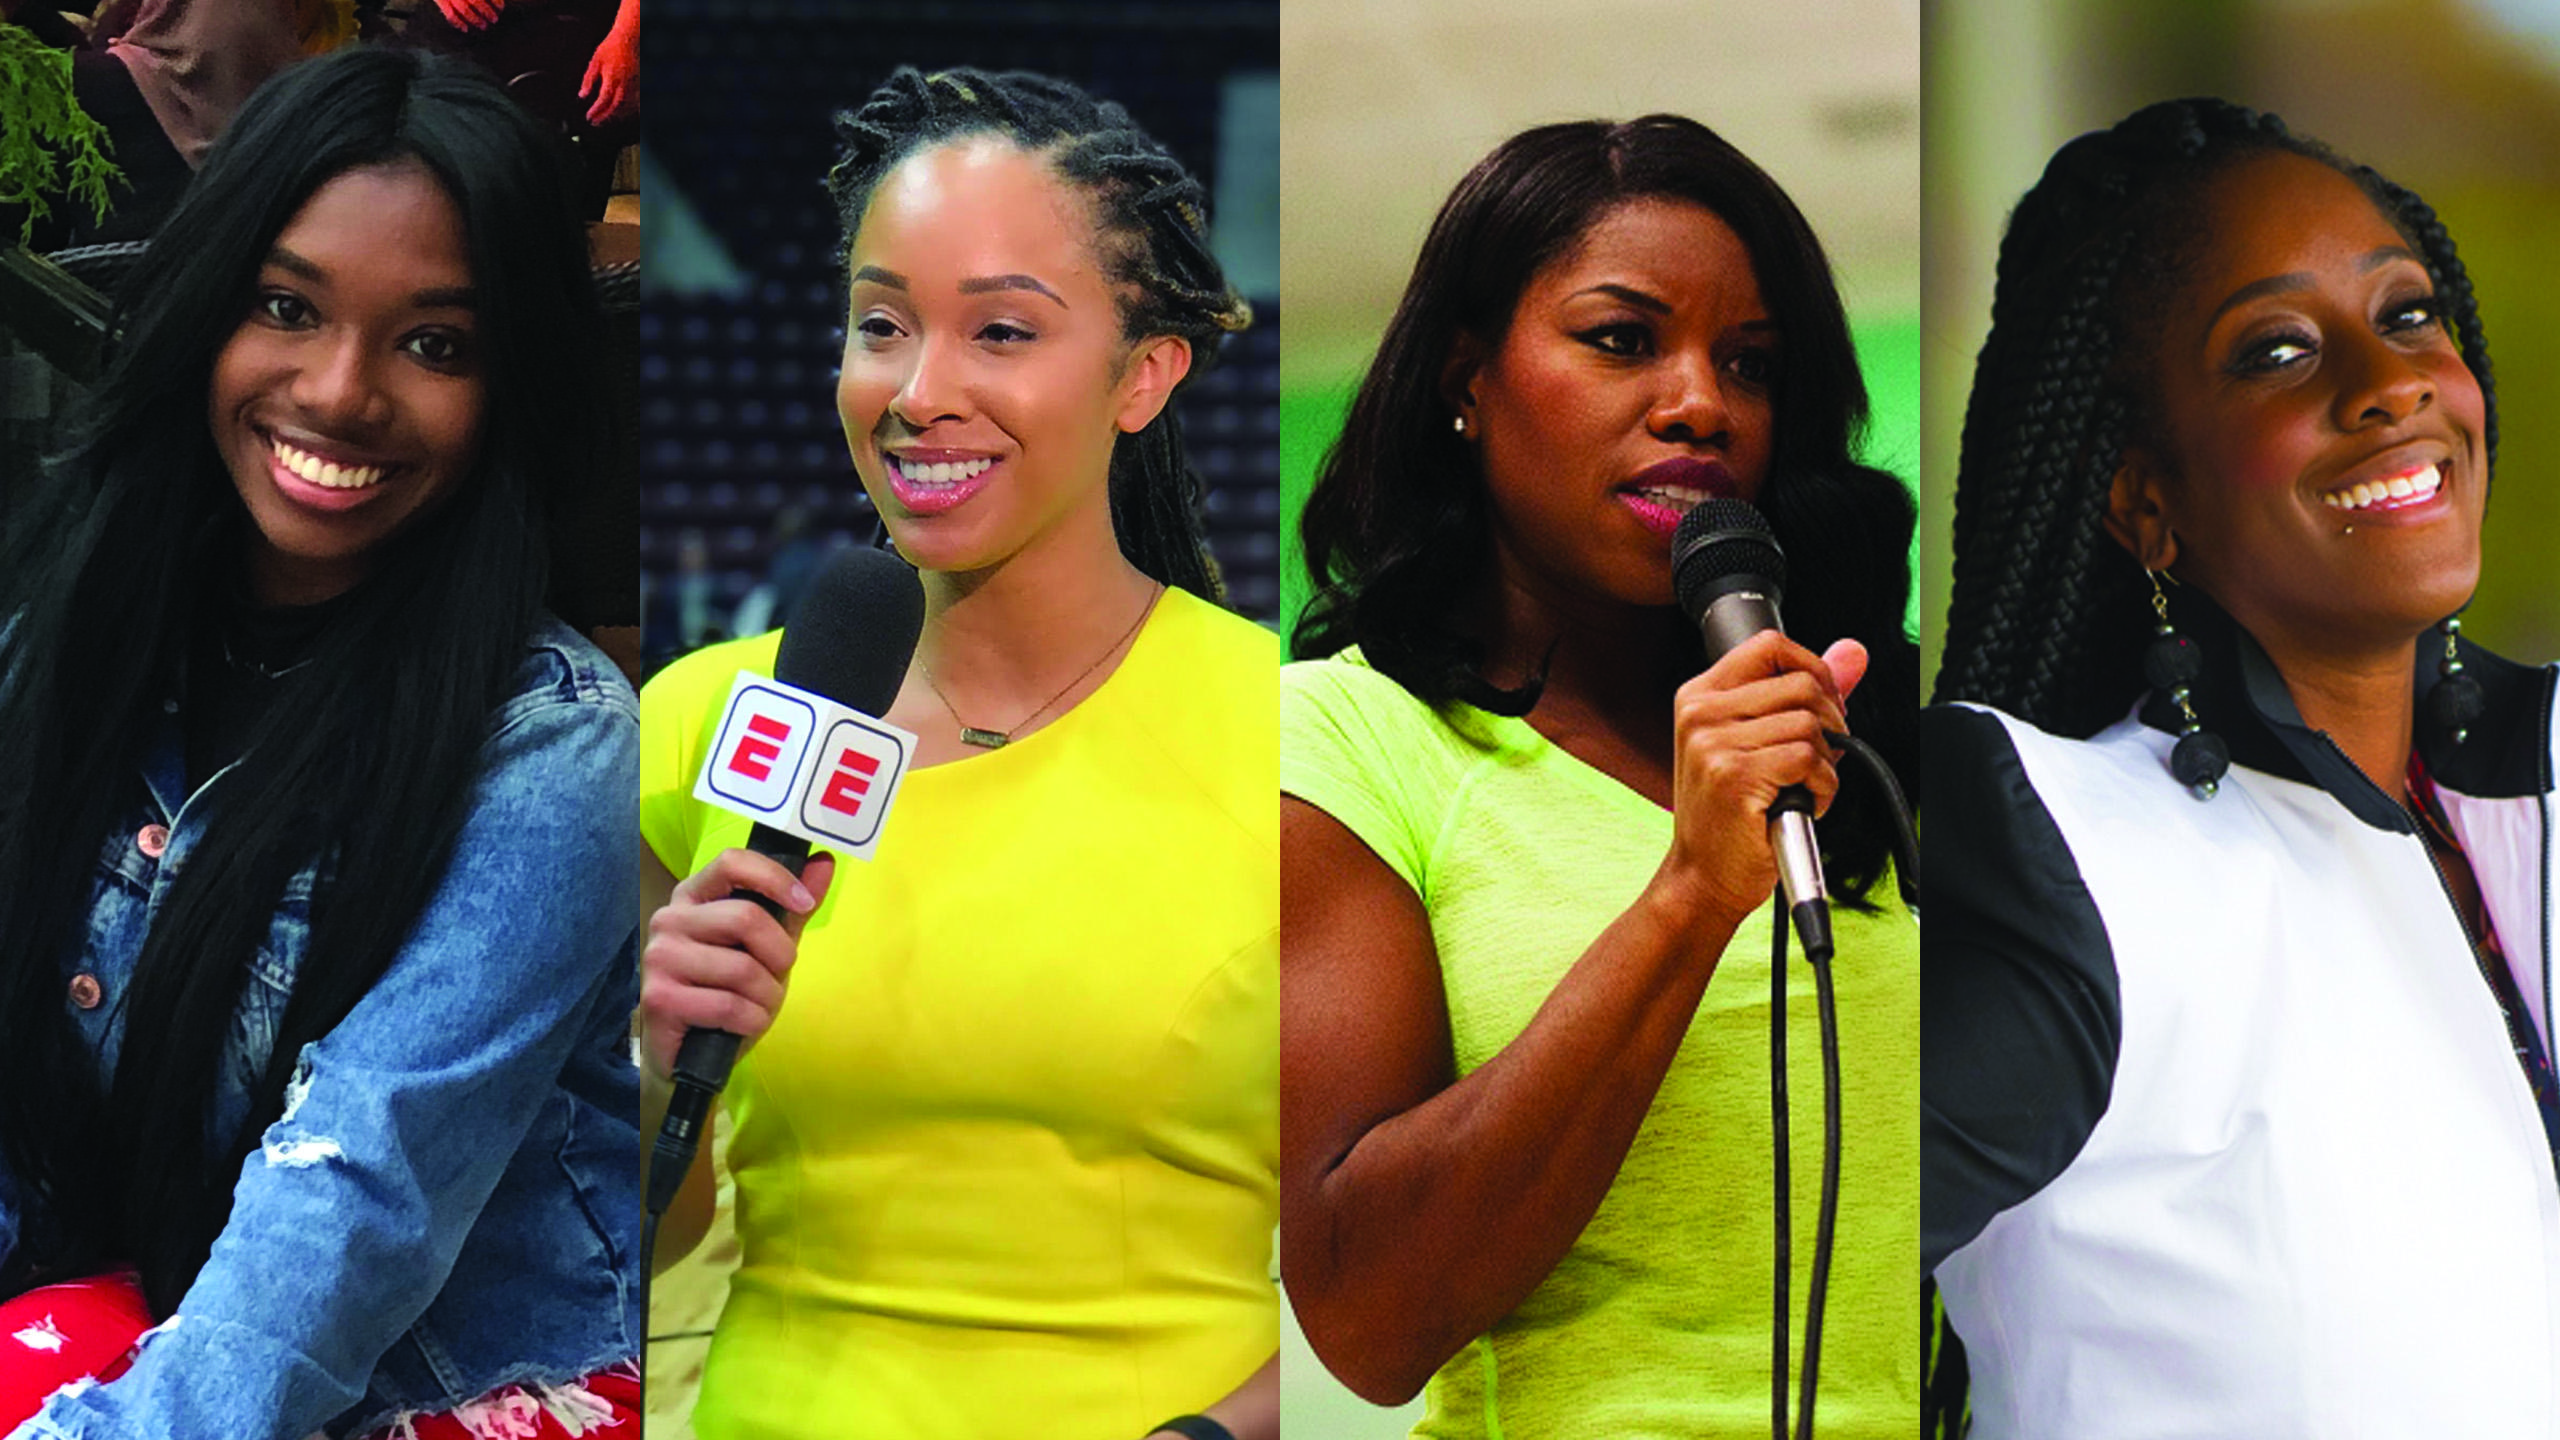 Walking in your shoes: Black female journalists give advice for up